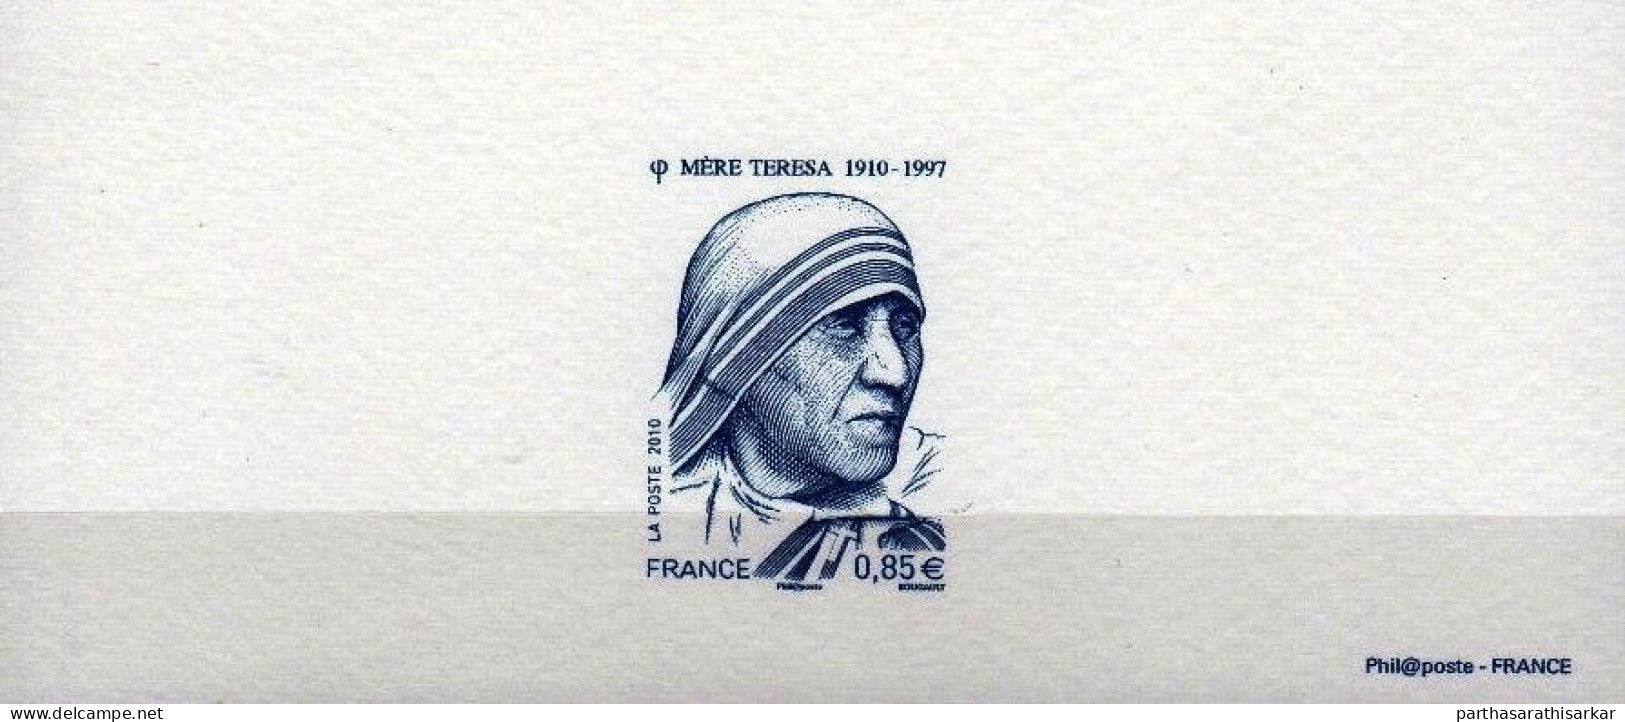 FRANCE 2010 100TH BIRTH ANNIVERSARY OF MOTHER TERESA 1910-1997 OFFICIAL DIE PROOF RARE - Mère Teresa